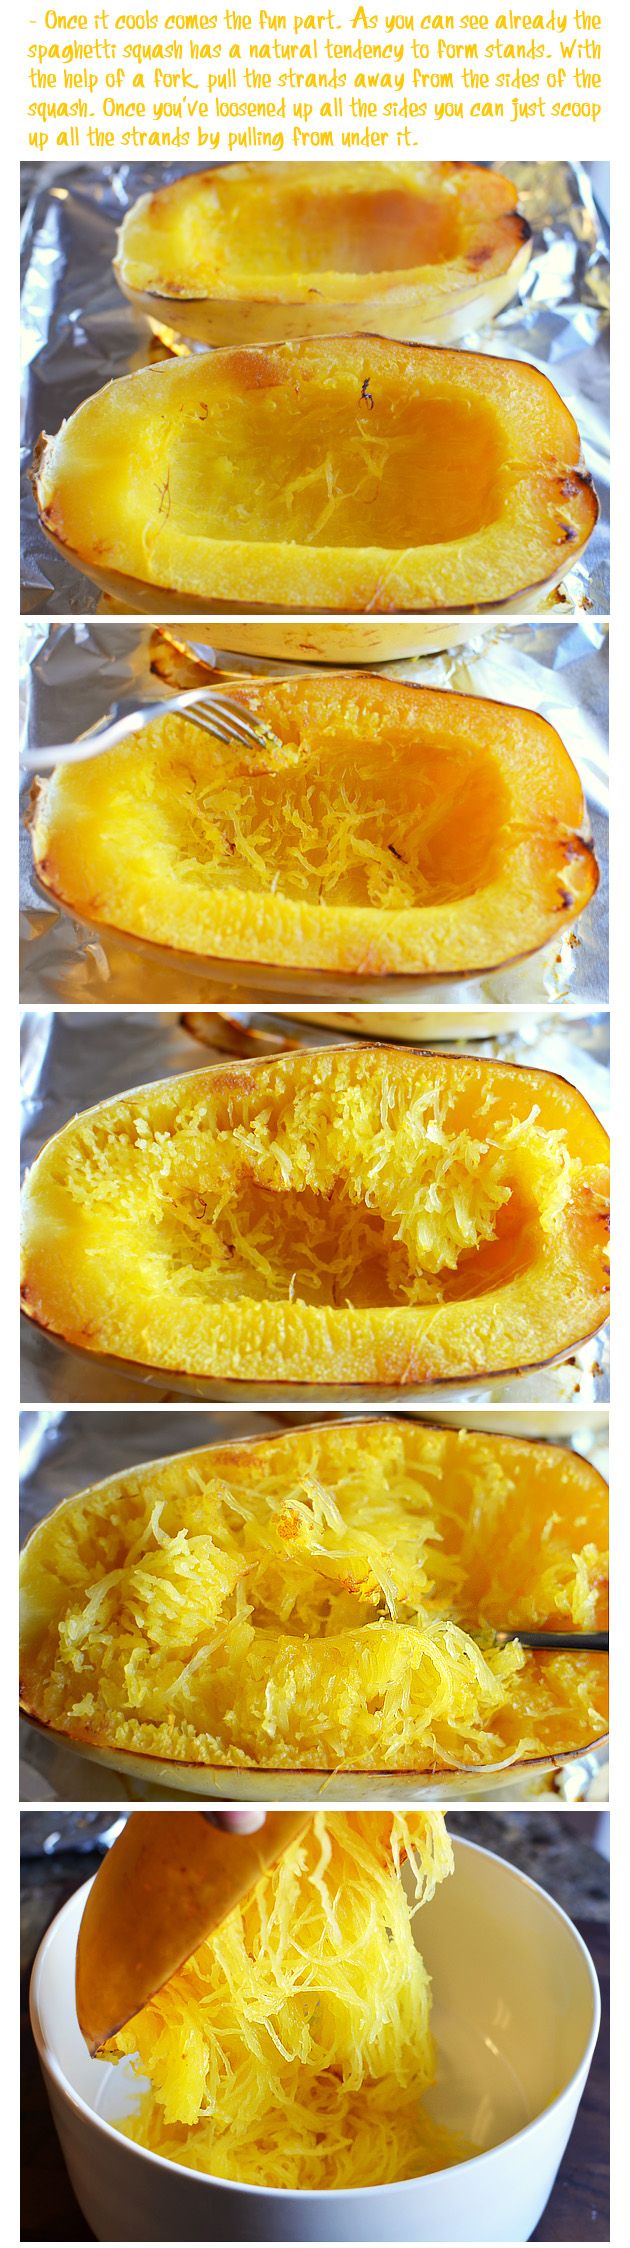 How to cook spaghetti squash…simple and delicious recipe included.